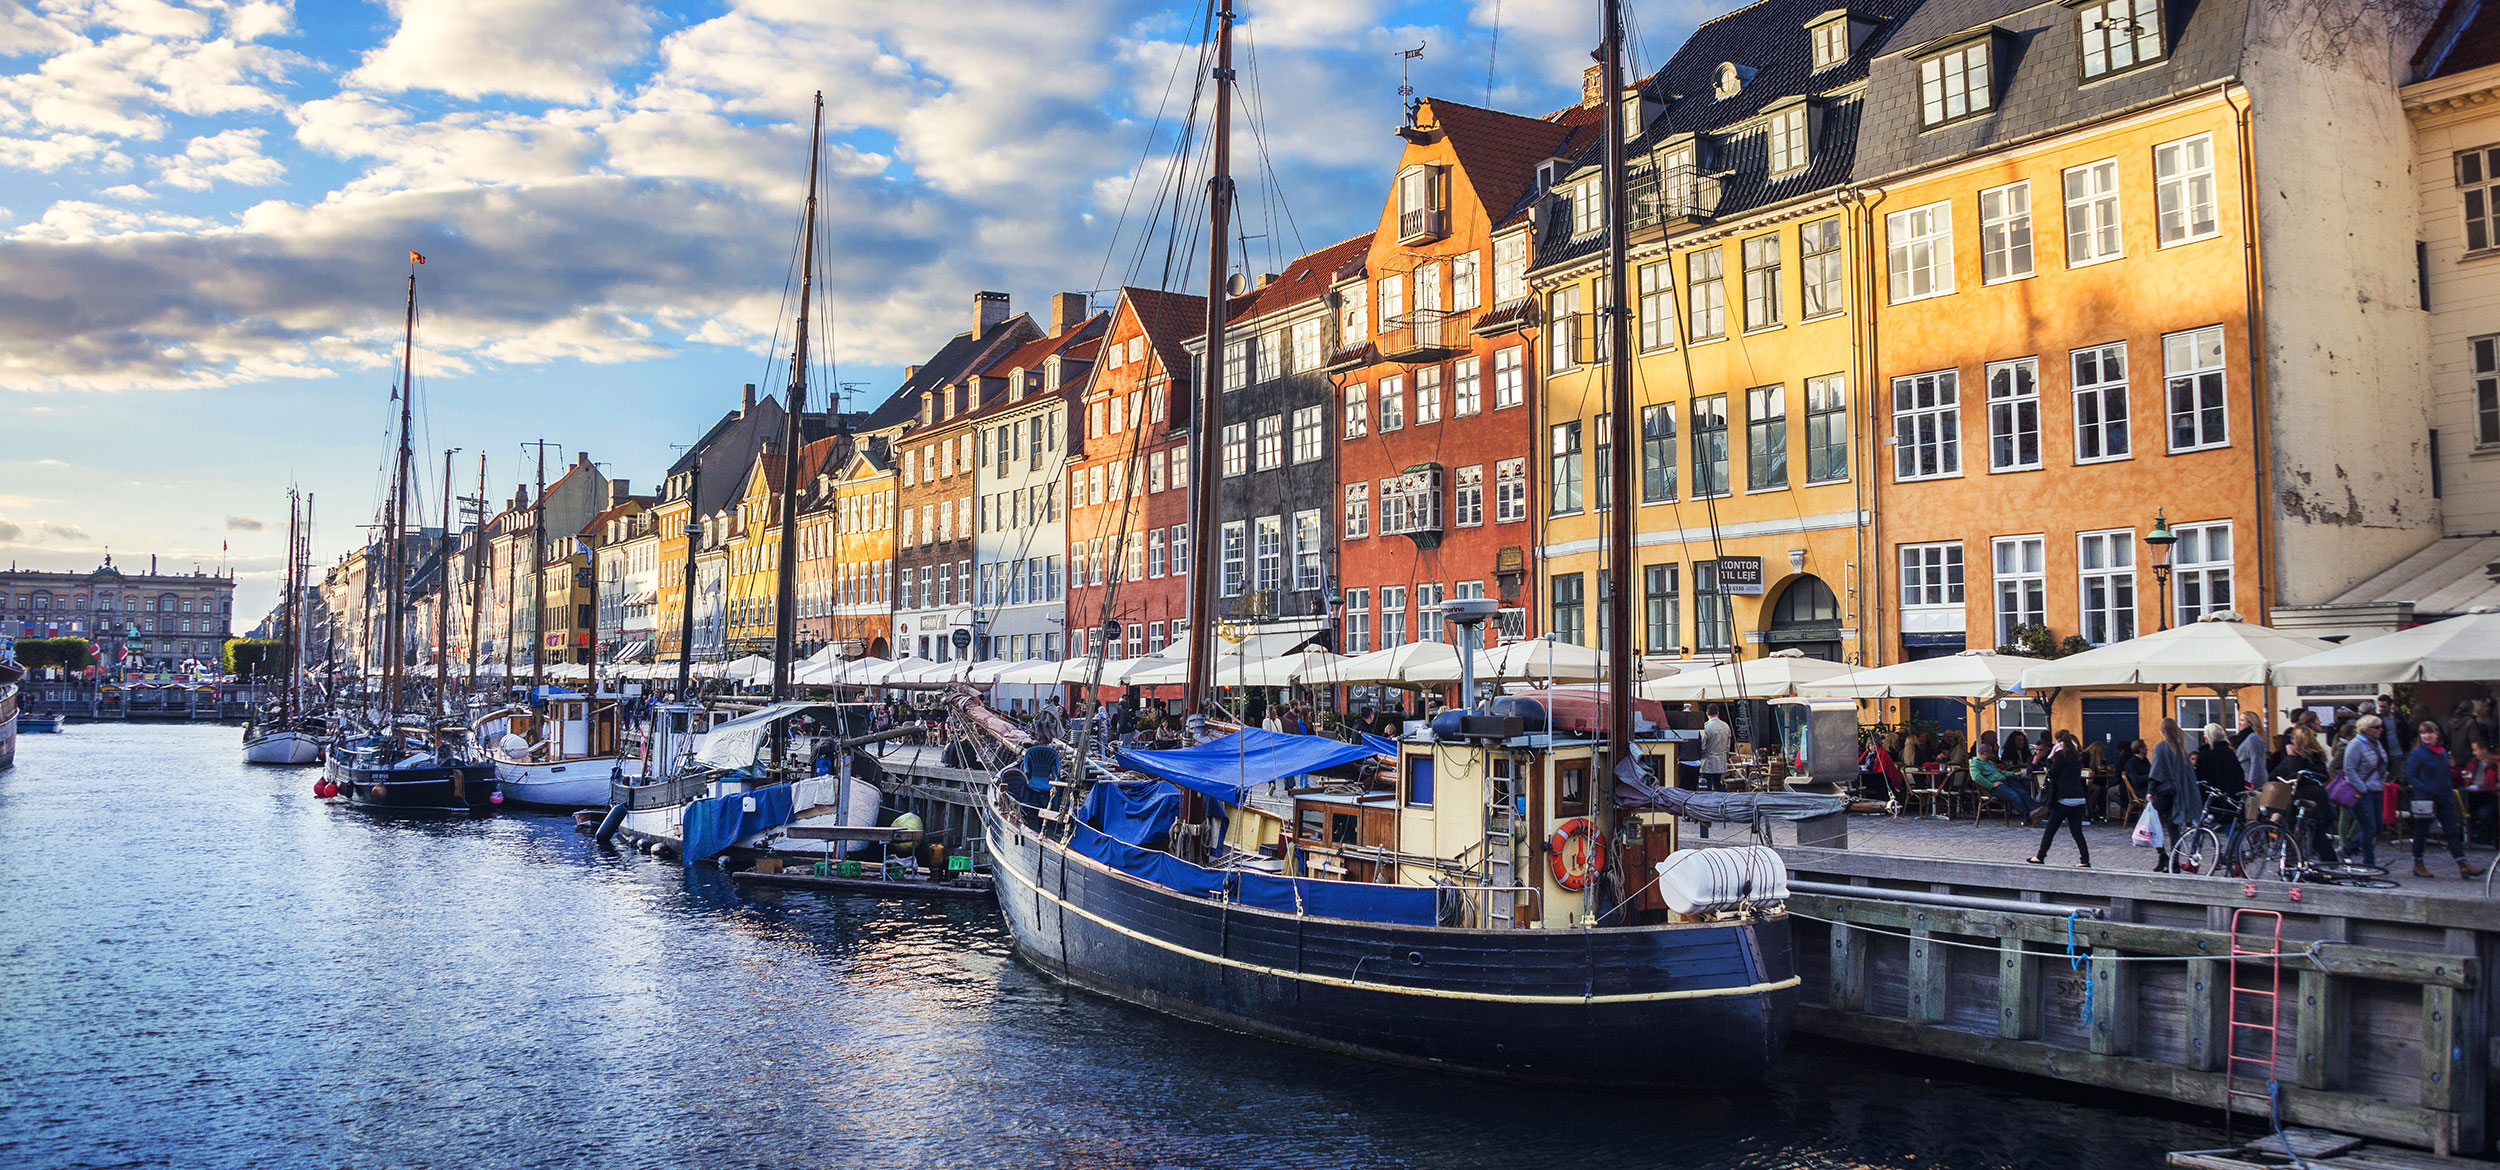 Colorful houses and boats at Nyhavn in Copenhagen, Denmark.